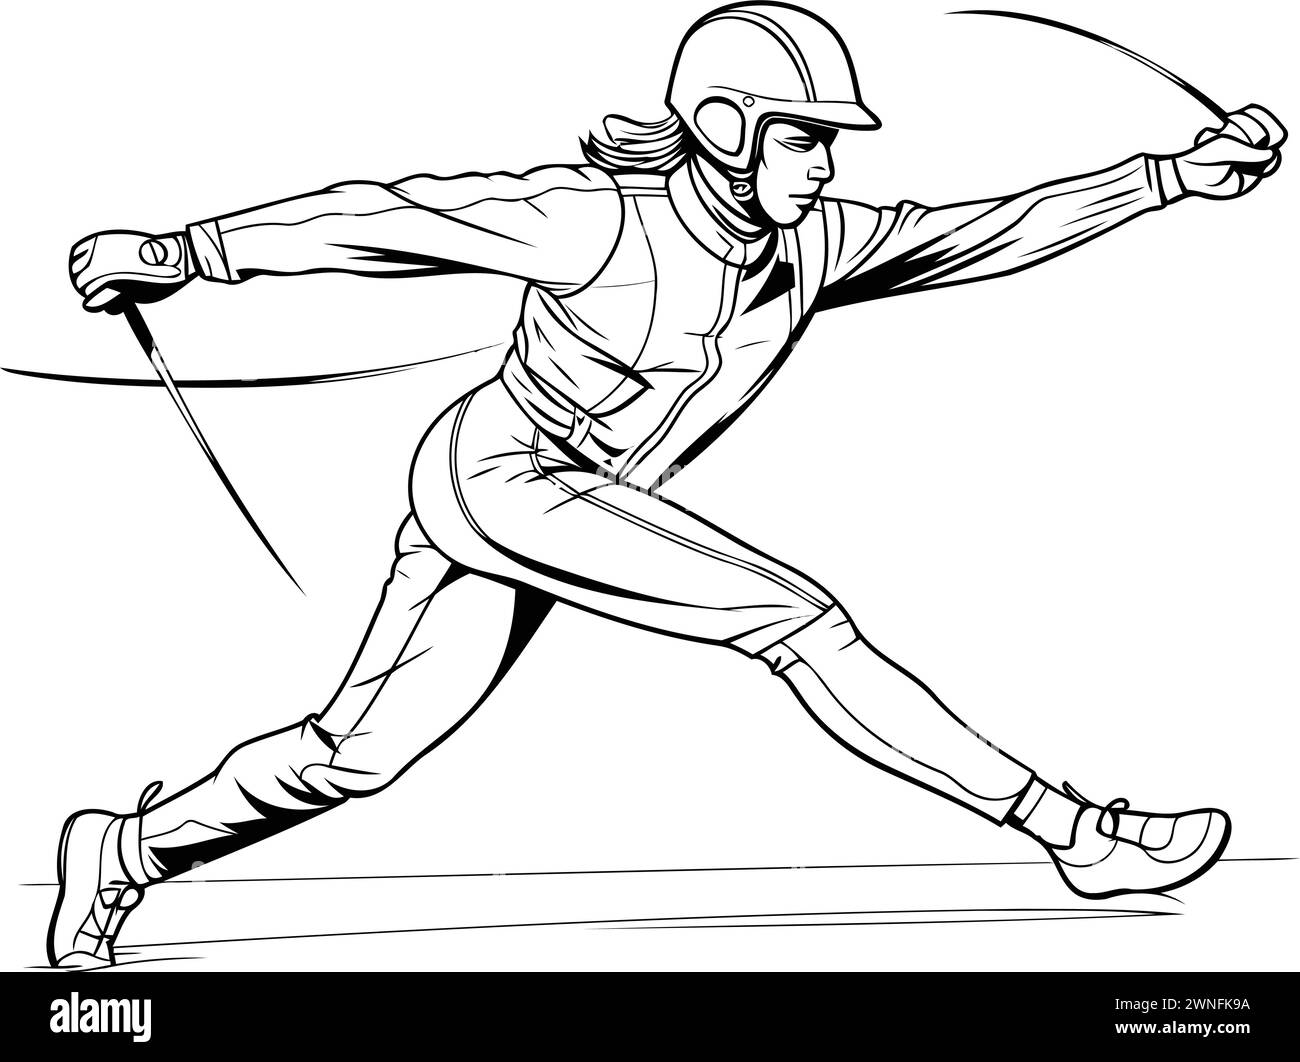 Fencing. Black and white vector illustration of a fencer in action. Stock Vector